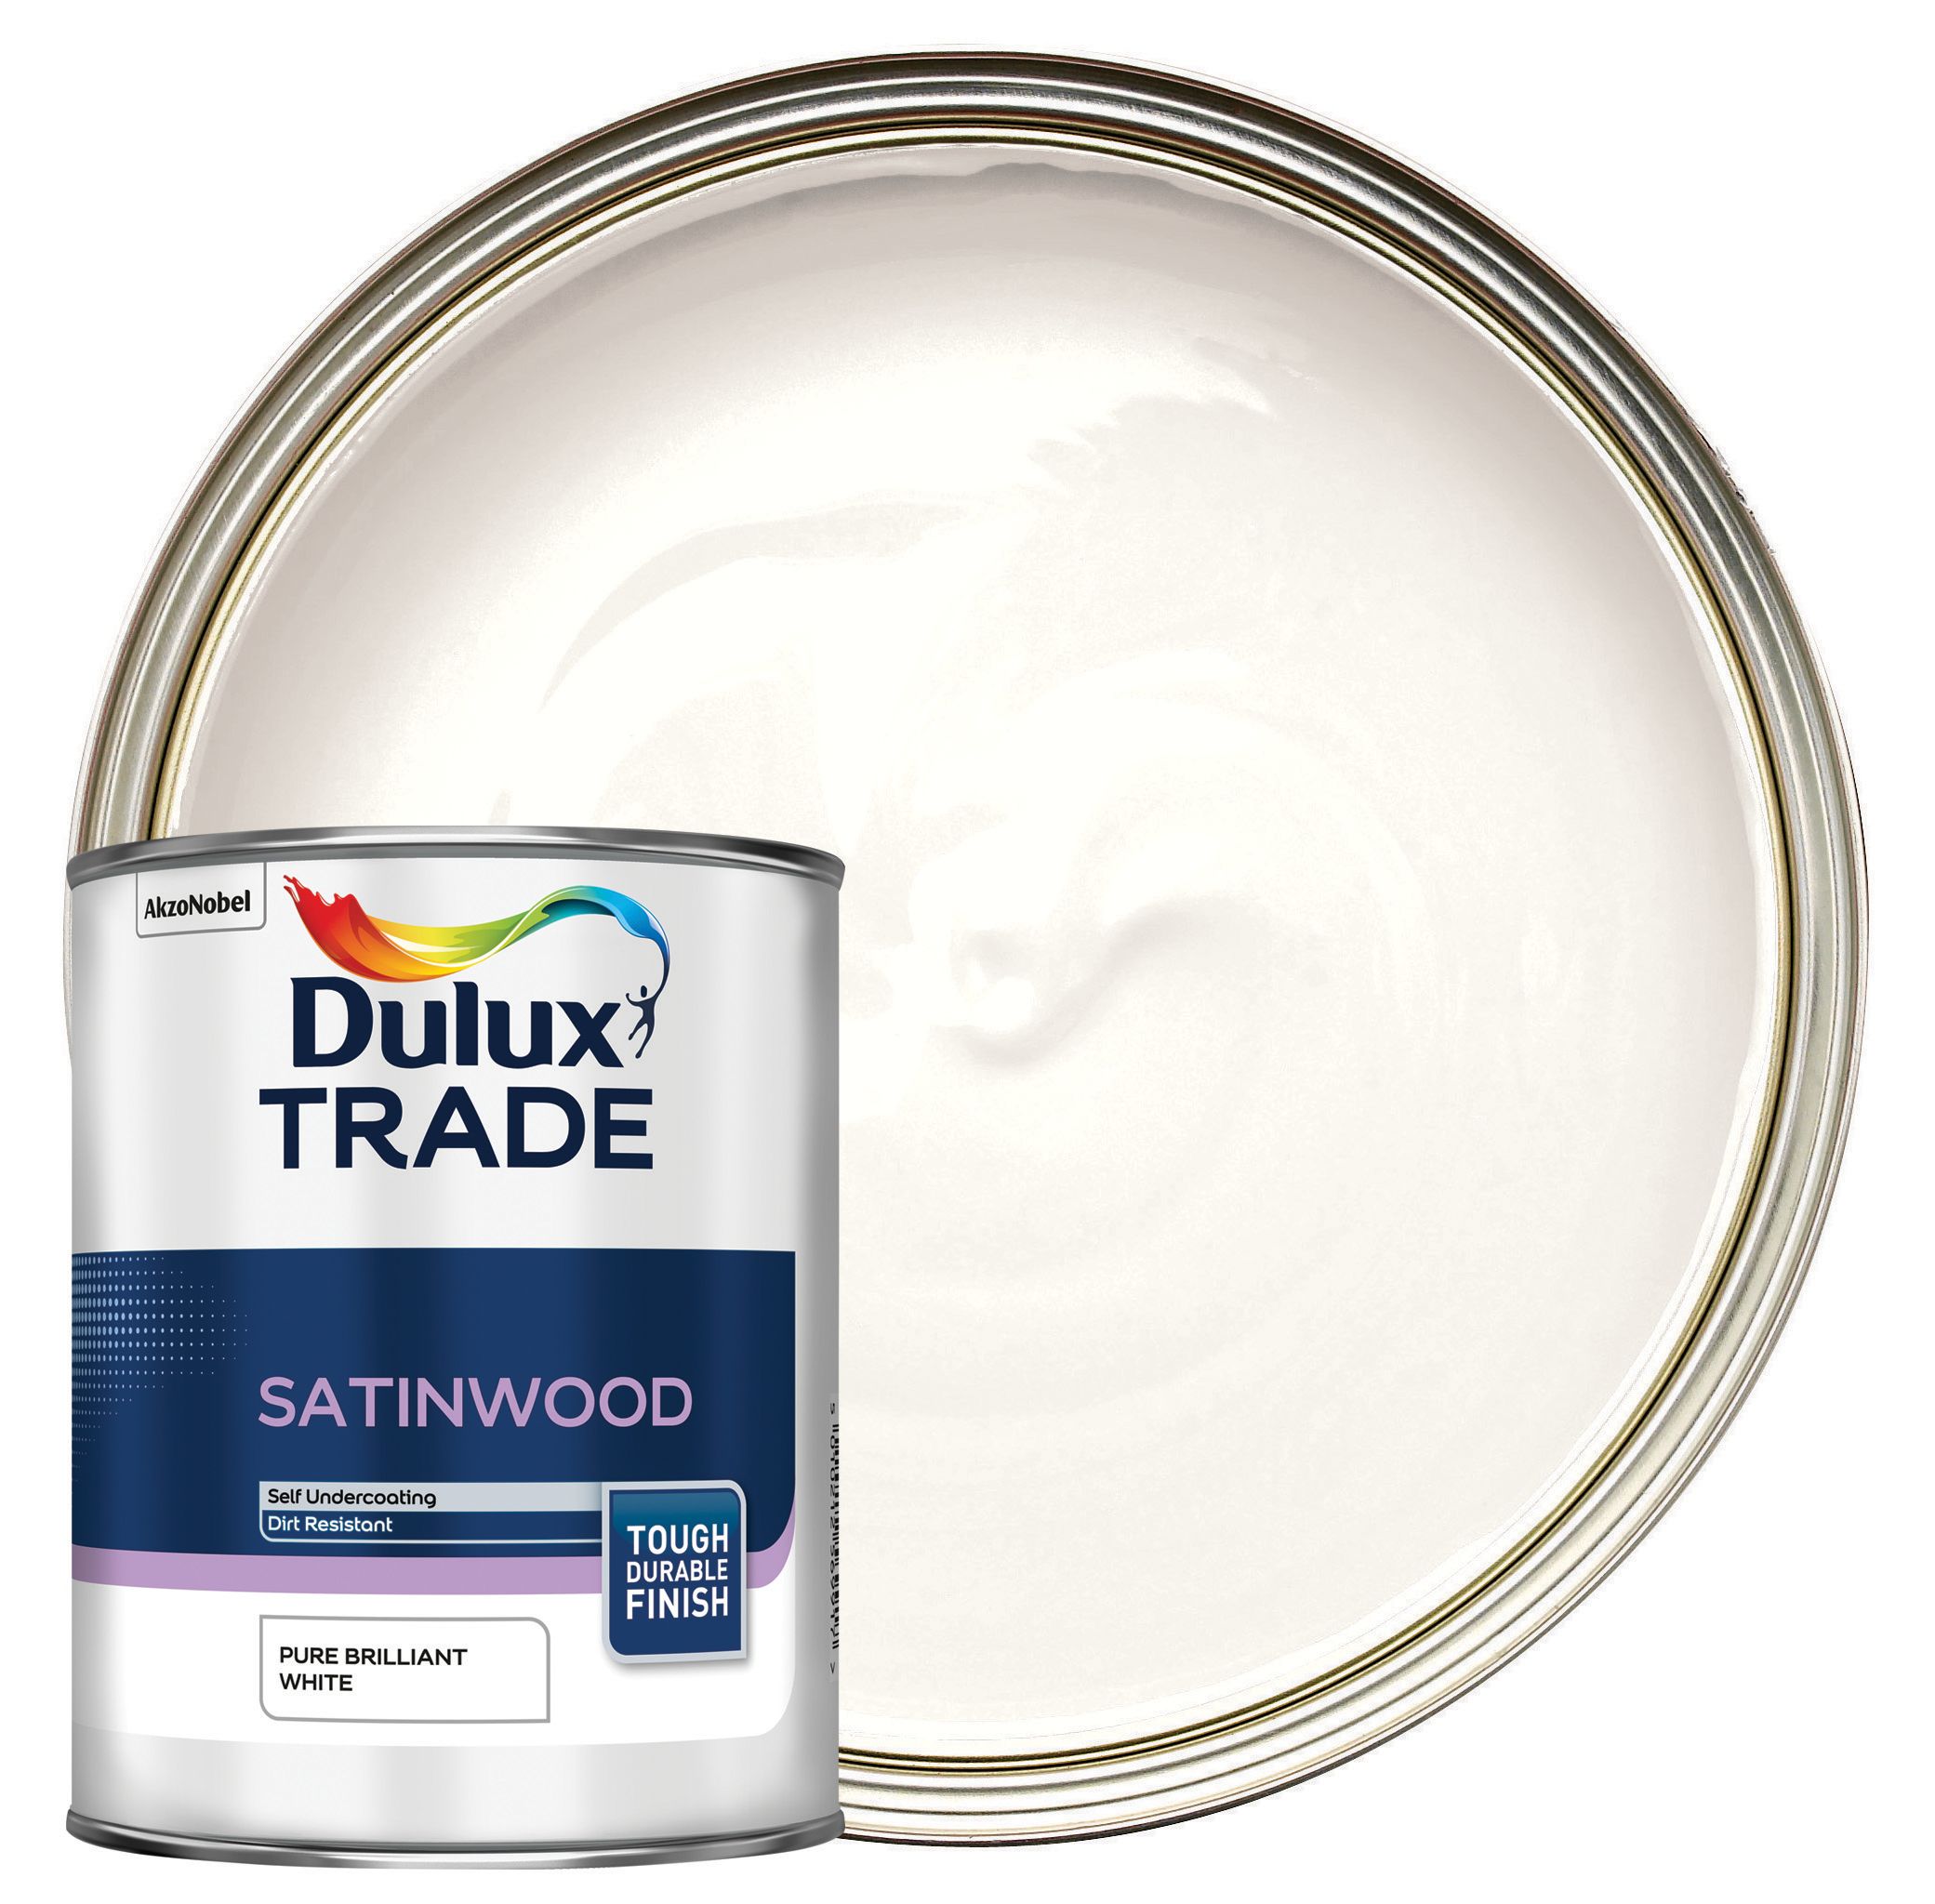 Image of Dulux Trade Satinwood Paint - Pure Brilliant White - 1L